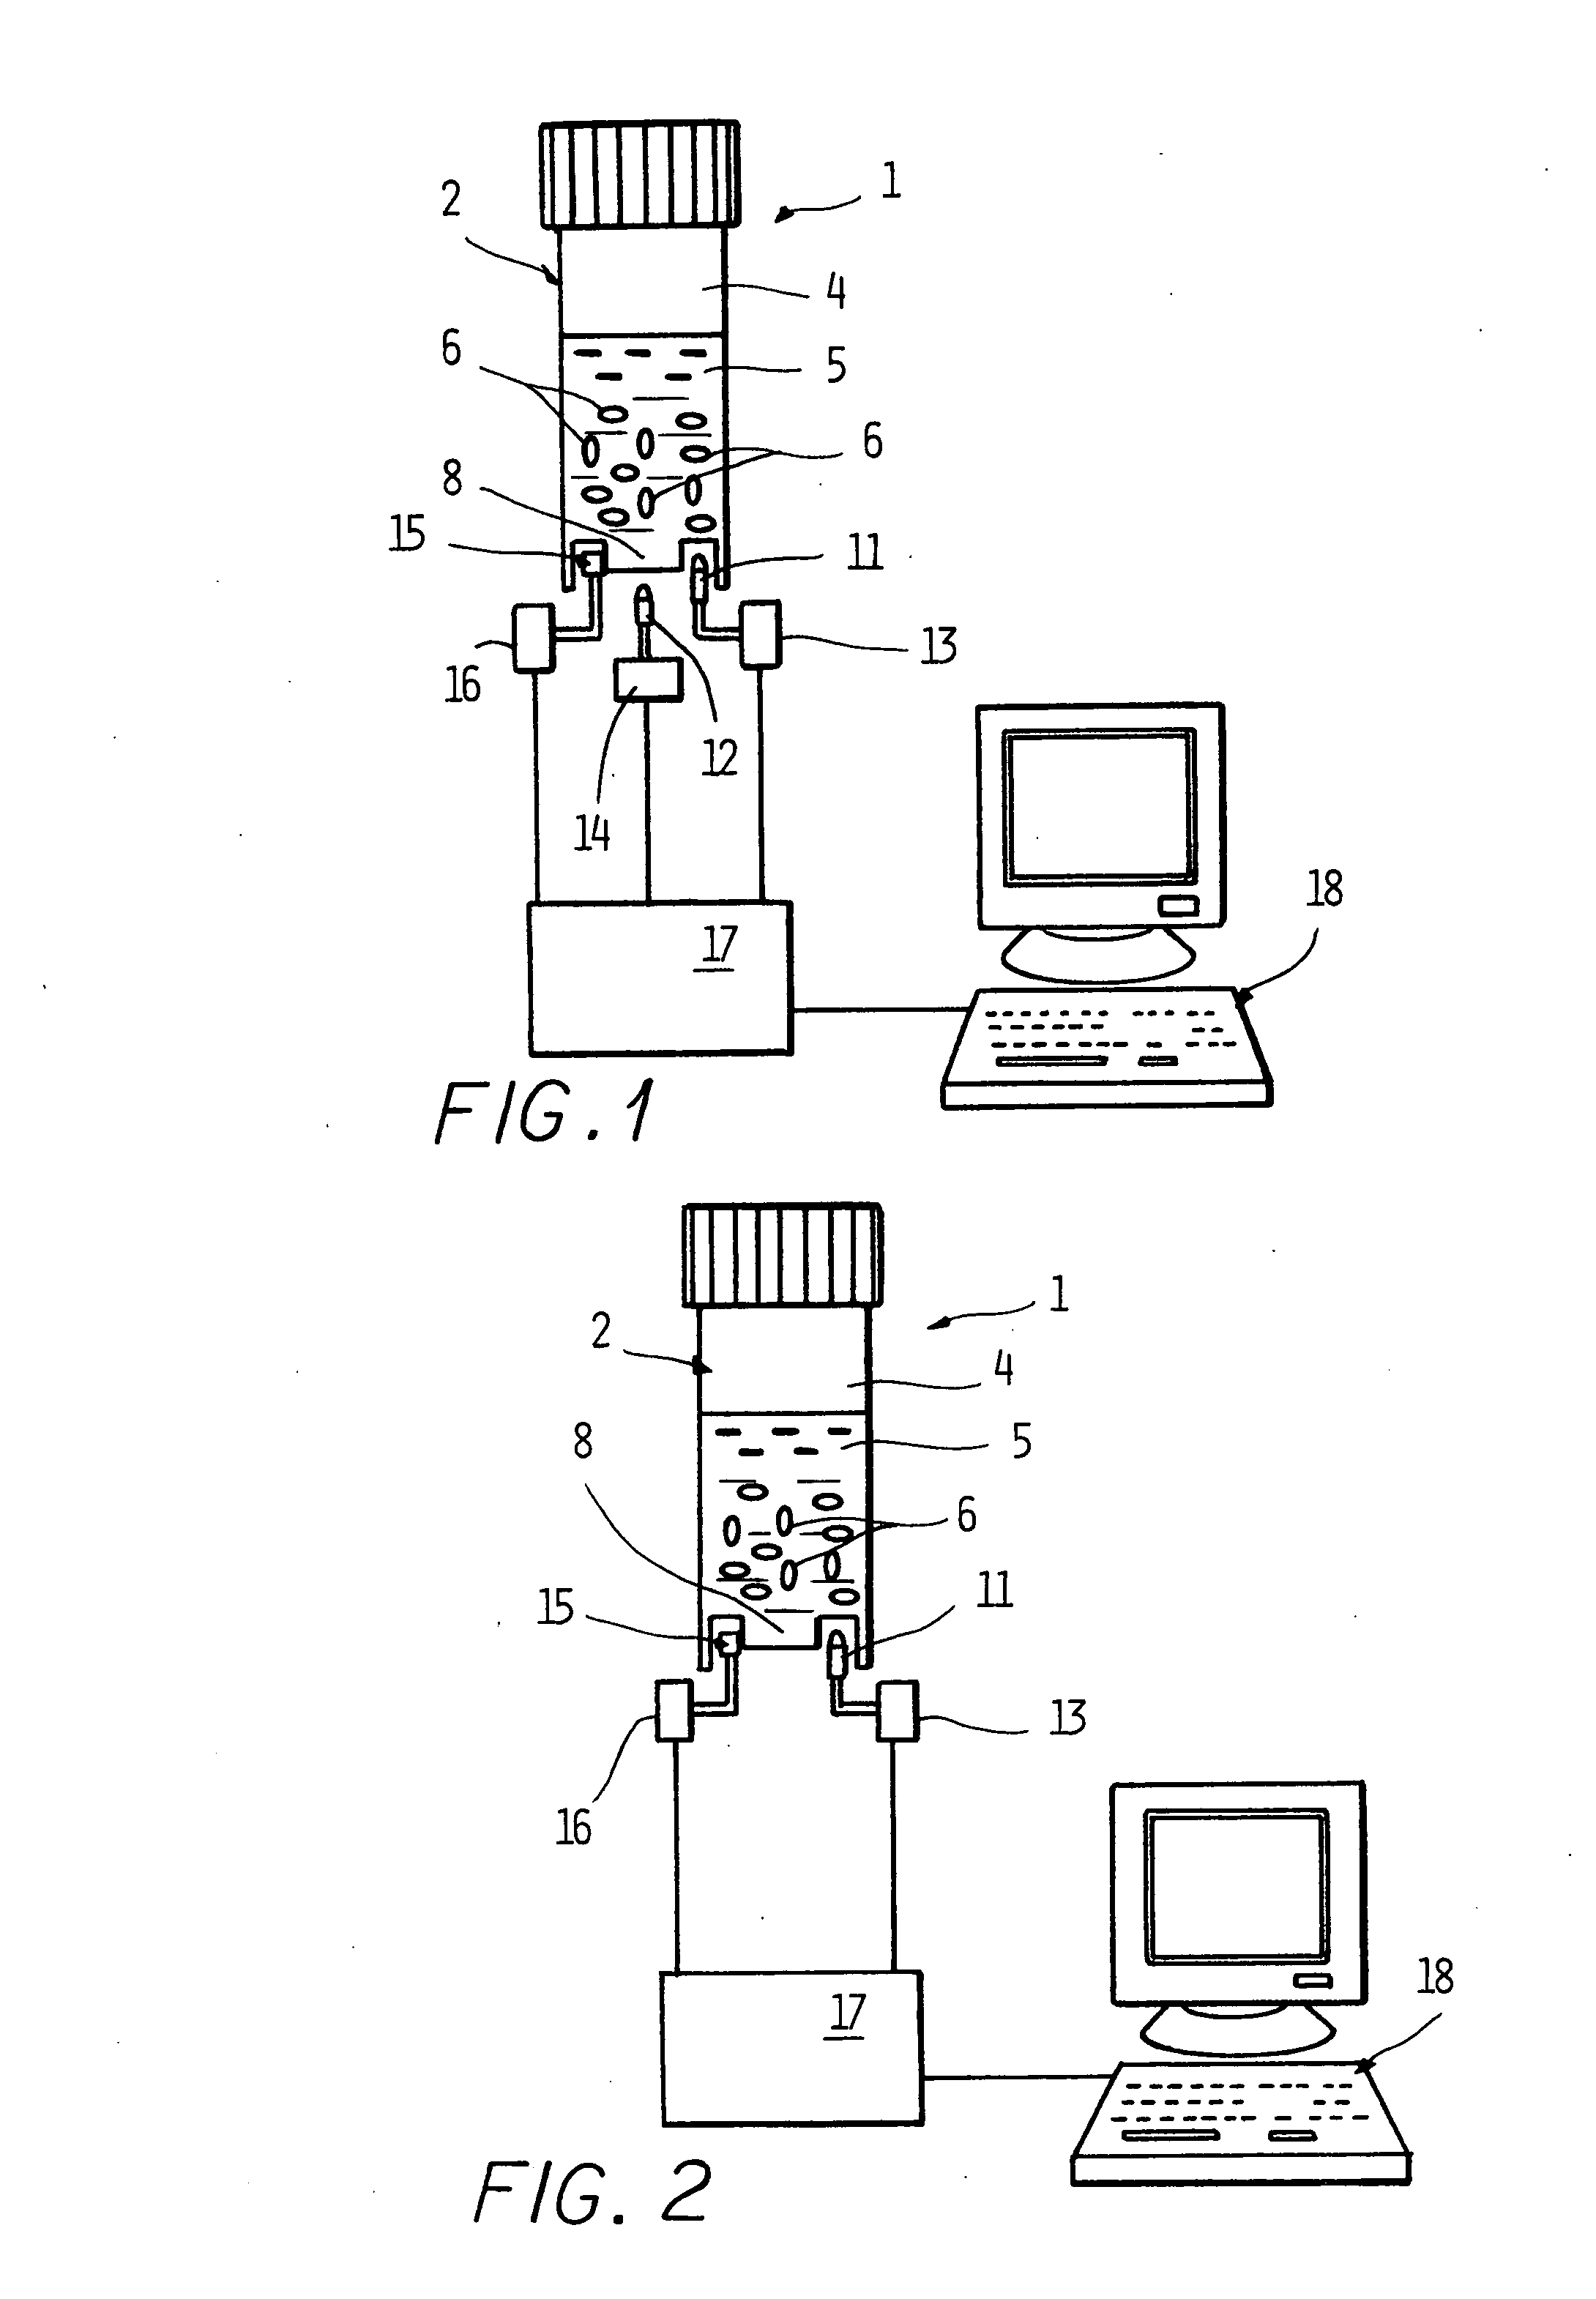 Device and Method for the Detection and Enumeration of Multiple Groups of Microorganisms